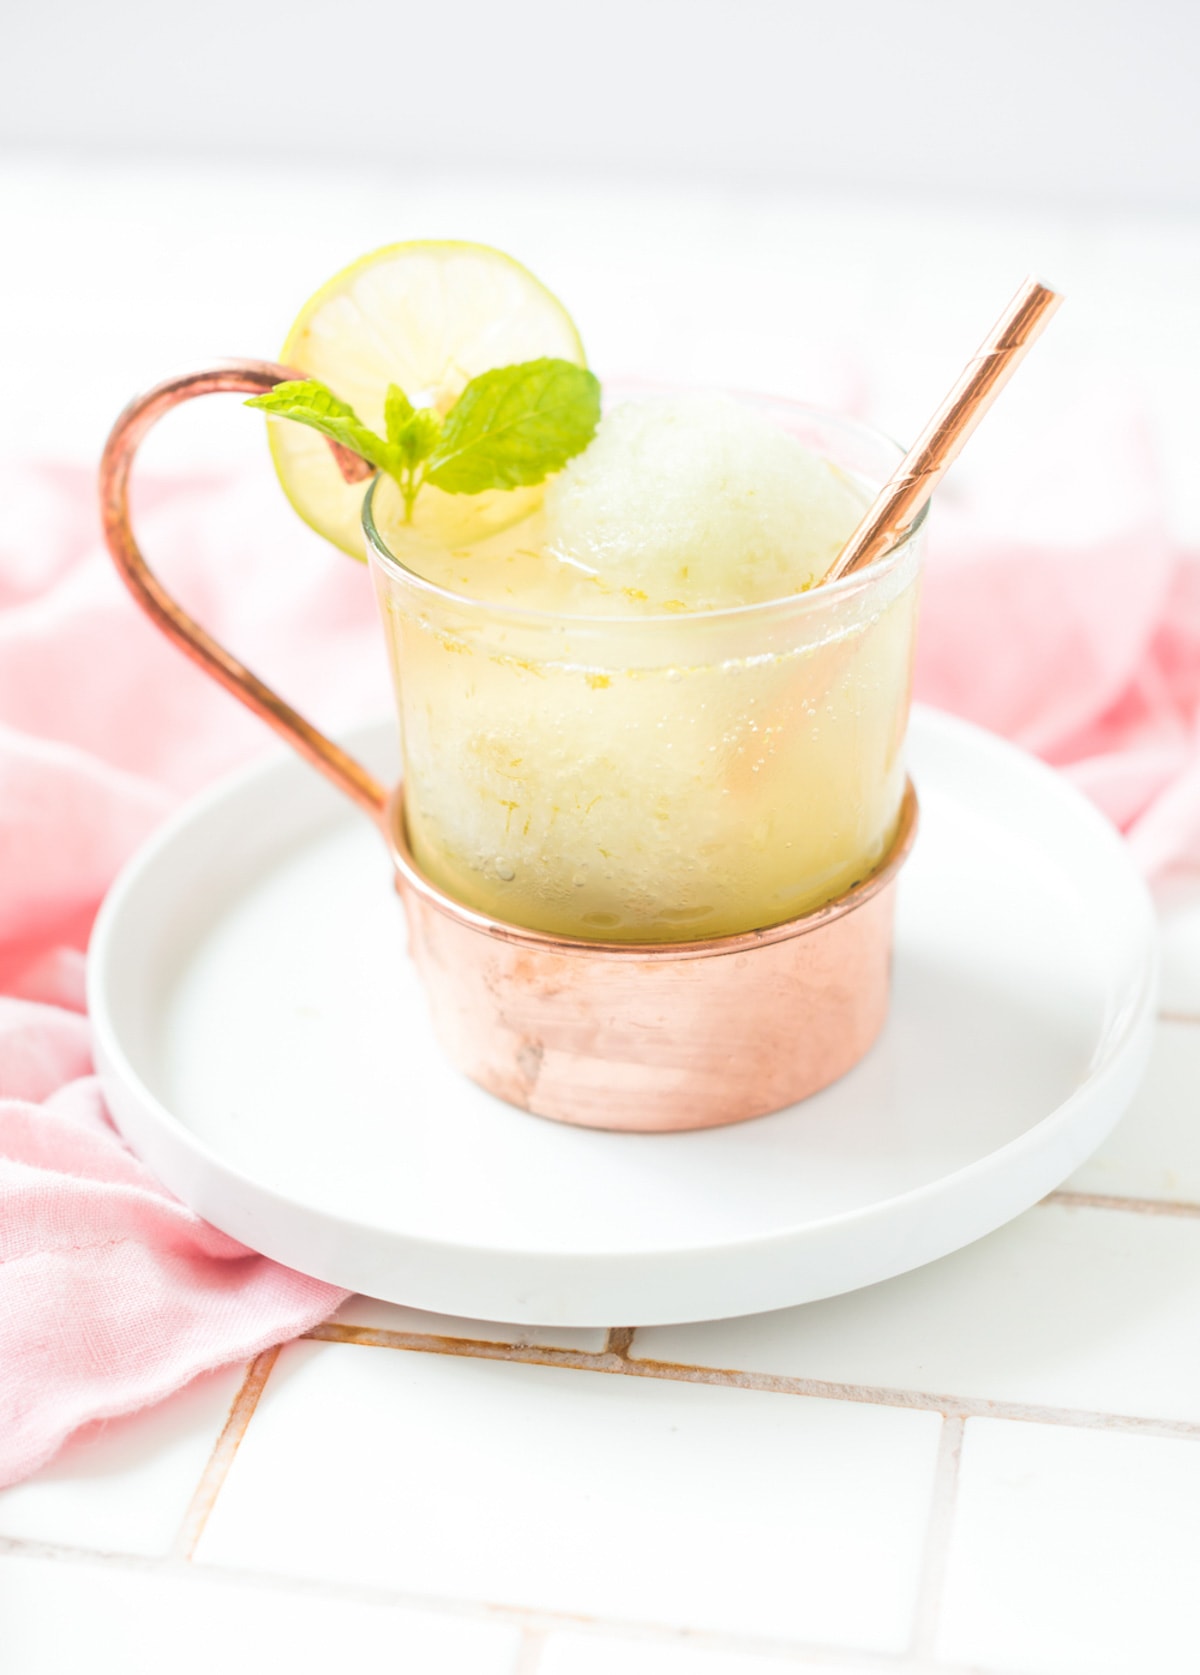 Moscow Mule Float by Ashley Rose of Sugar & Cloth, a top lifestyle blog in Houston, Texas